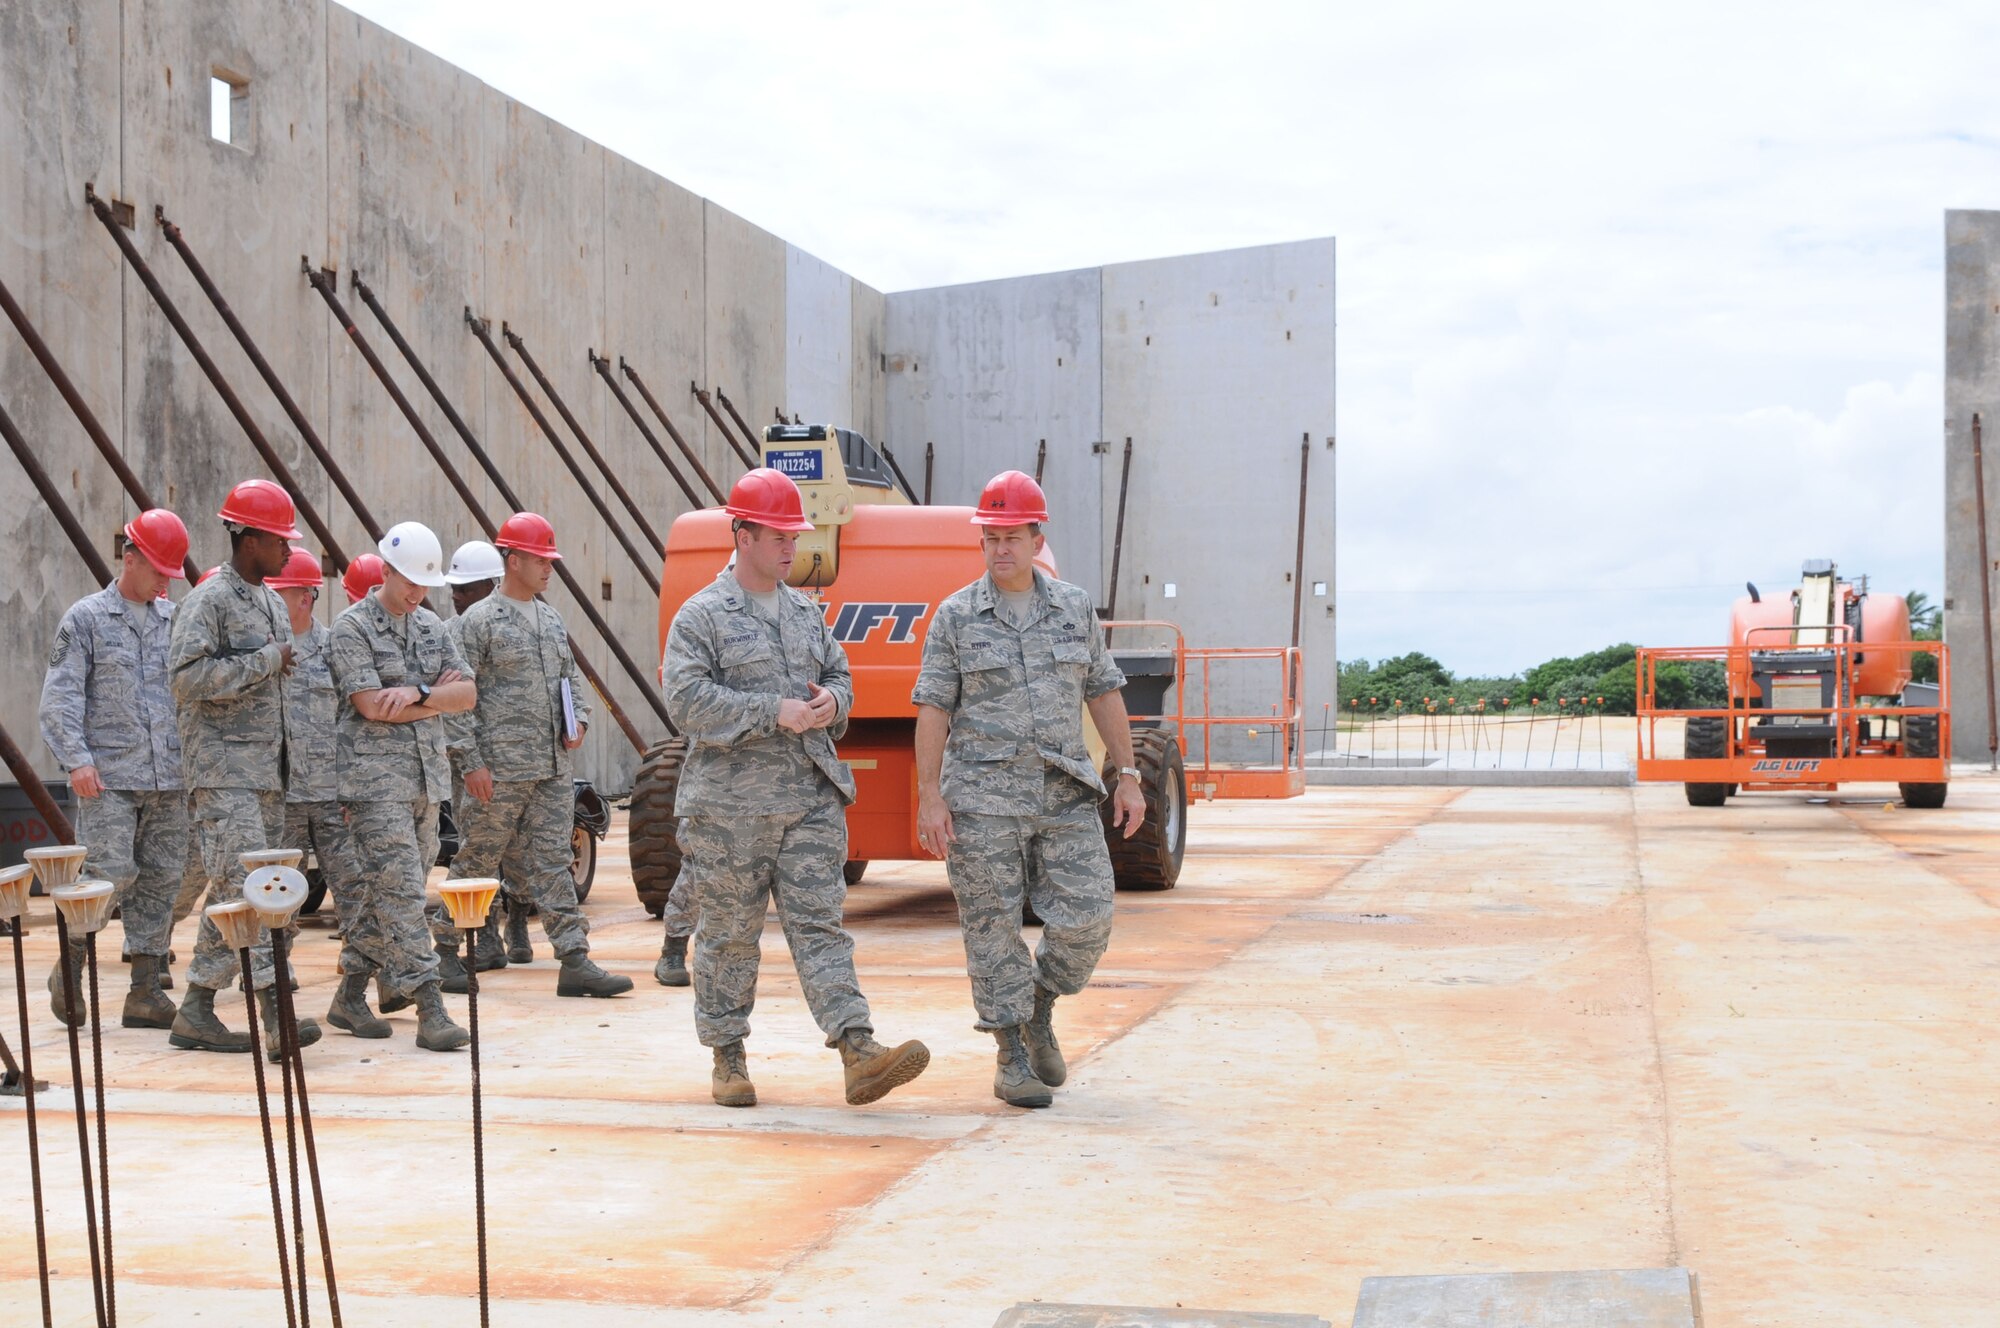 ANDERSEN AIR FORCE BASE, Guam – Capt. Adam Burwinkle (left center), 554th RED HORSE Squadron officer in charge of construction, briefs Maj. Gen. Timothy Byers (right), Air Force Civil Engineer, Headquarters U.S. Air Force, Oct. 30 on North-West Field construction programs in the vertical capabilities warehouse. North-West Field will house the PACAF Regional Training Center which will house Commando Warrior training and Silver Flag training. (U.S. Air Force photo/ Senior Airman Carlin Leslie)